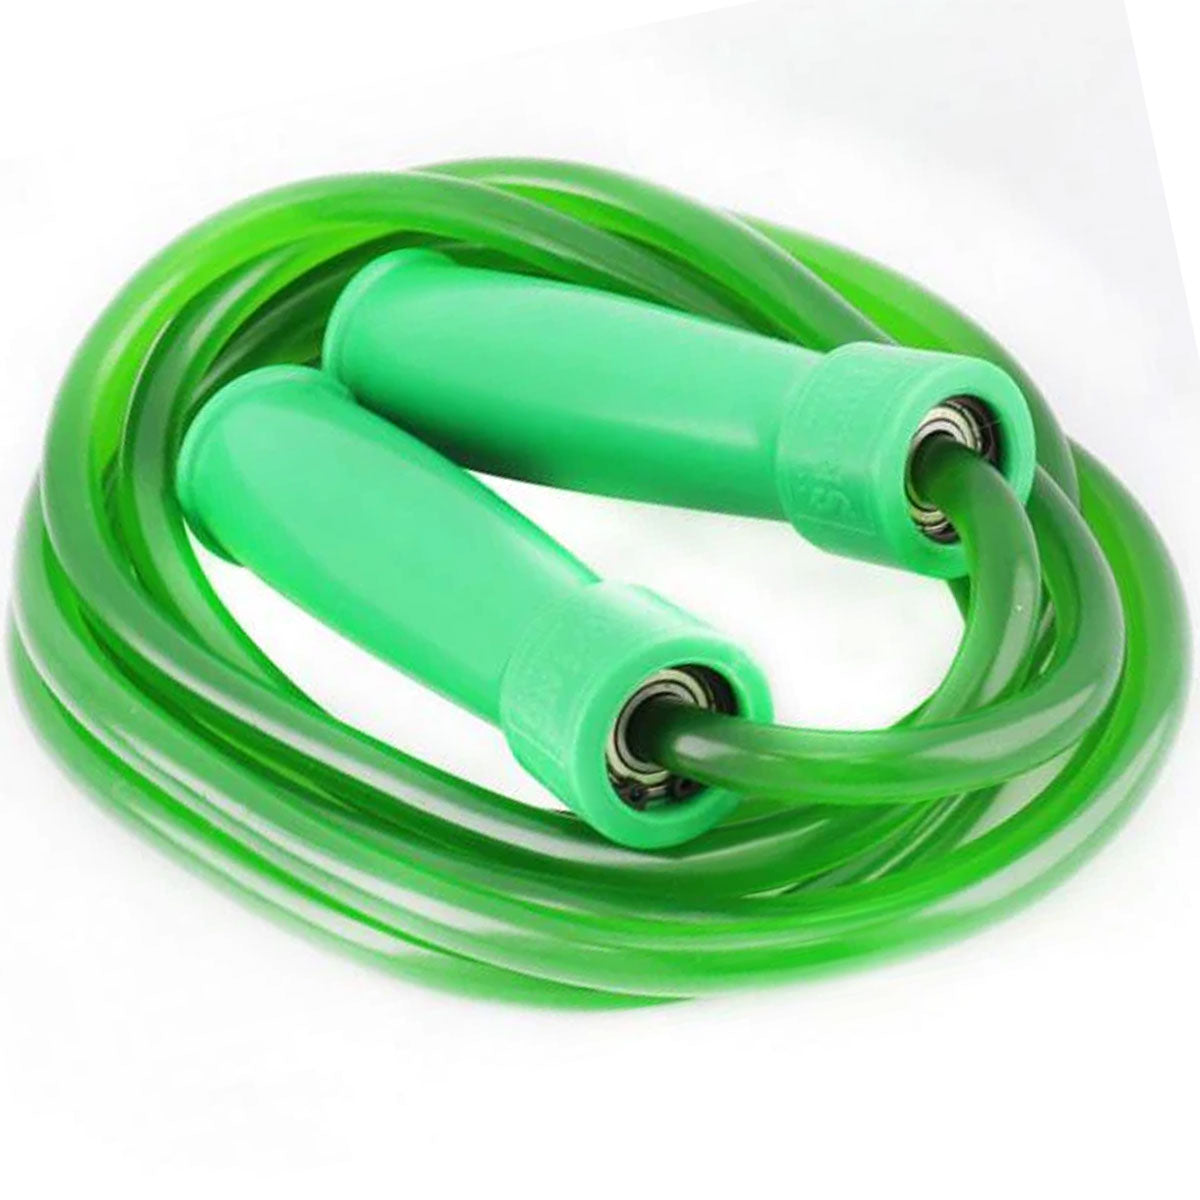 Skipping Rope SR-2 Twins Special for Muay Thai Fitness Boxing MMA